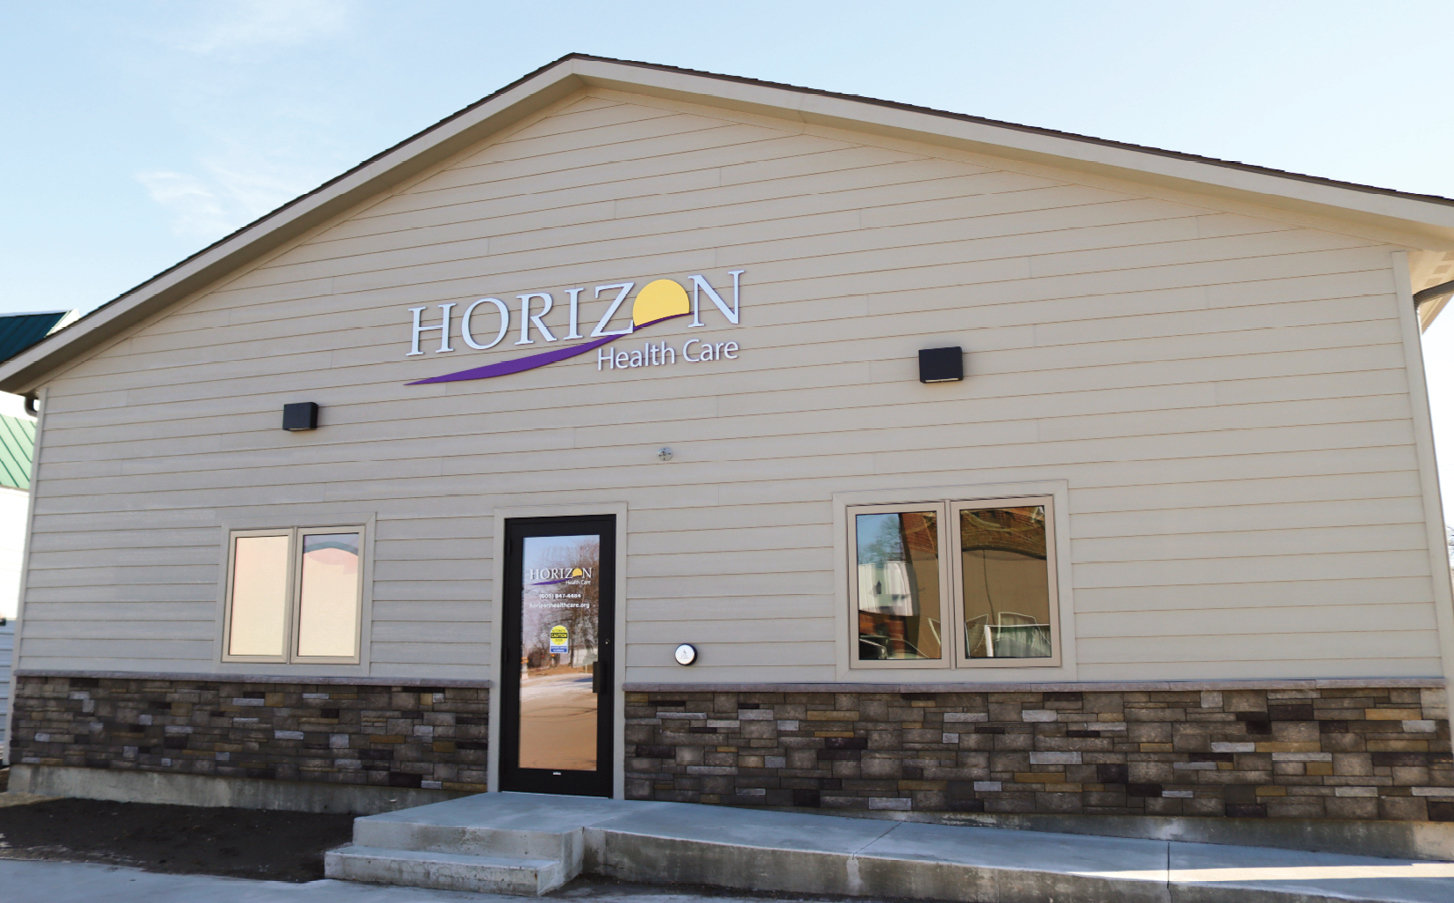 Horizon’s newest community health center in Lake Preston will host its grand-opening May 17 from 11:30 to 1:30. The program and ribbon cutting will take place at 12:15. Lunch and refreshments will be served.